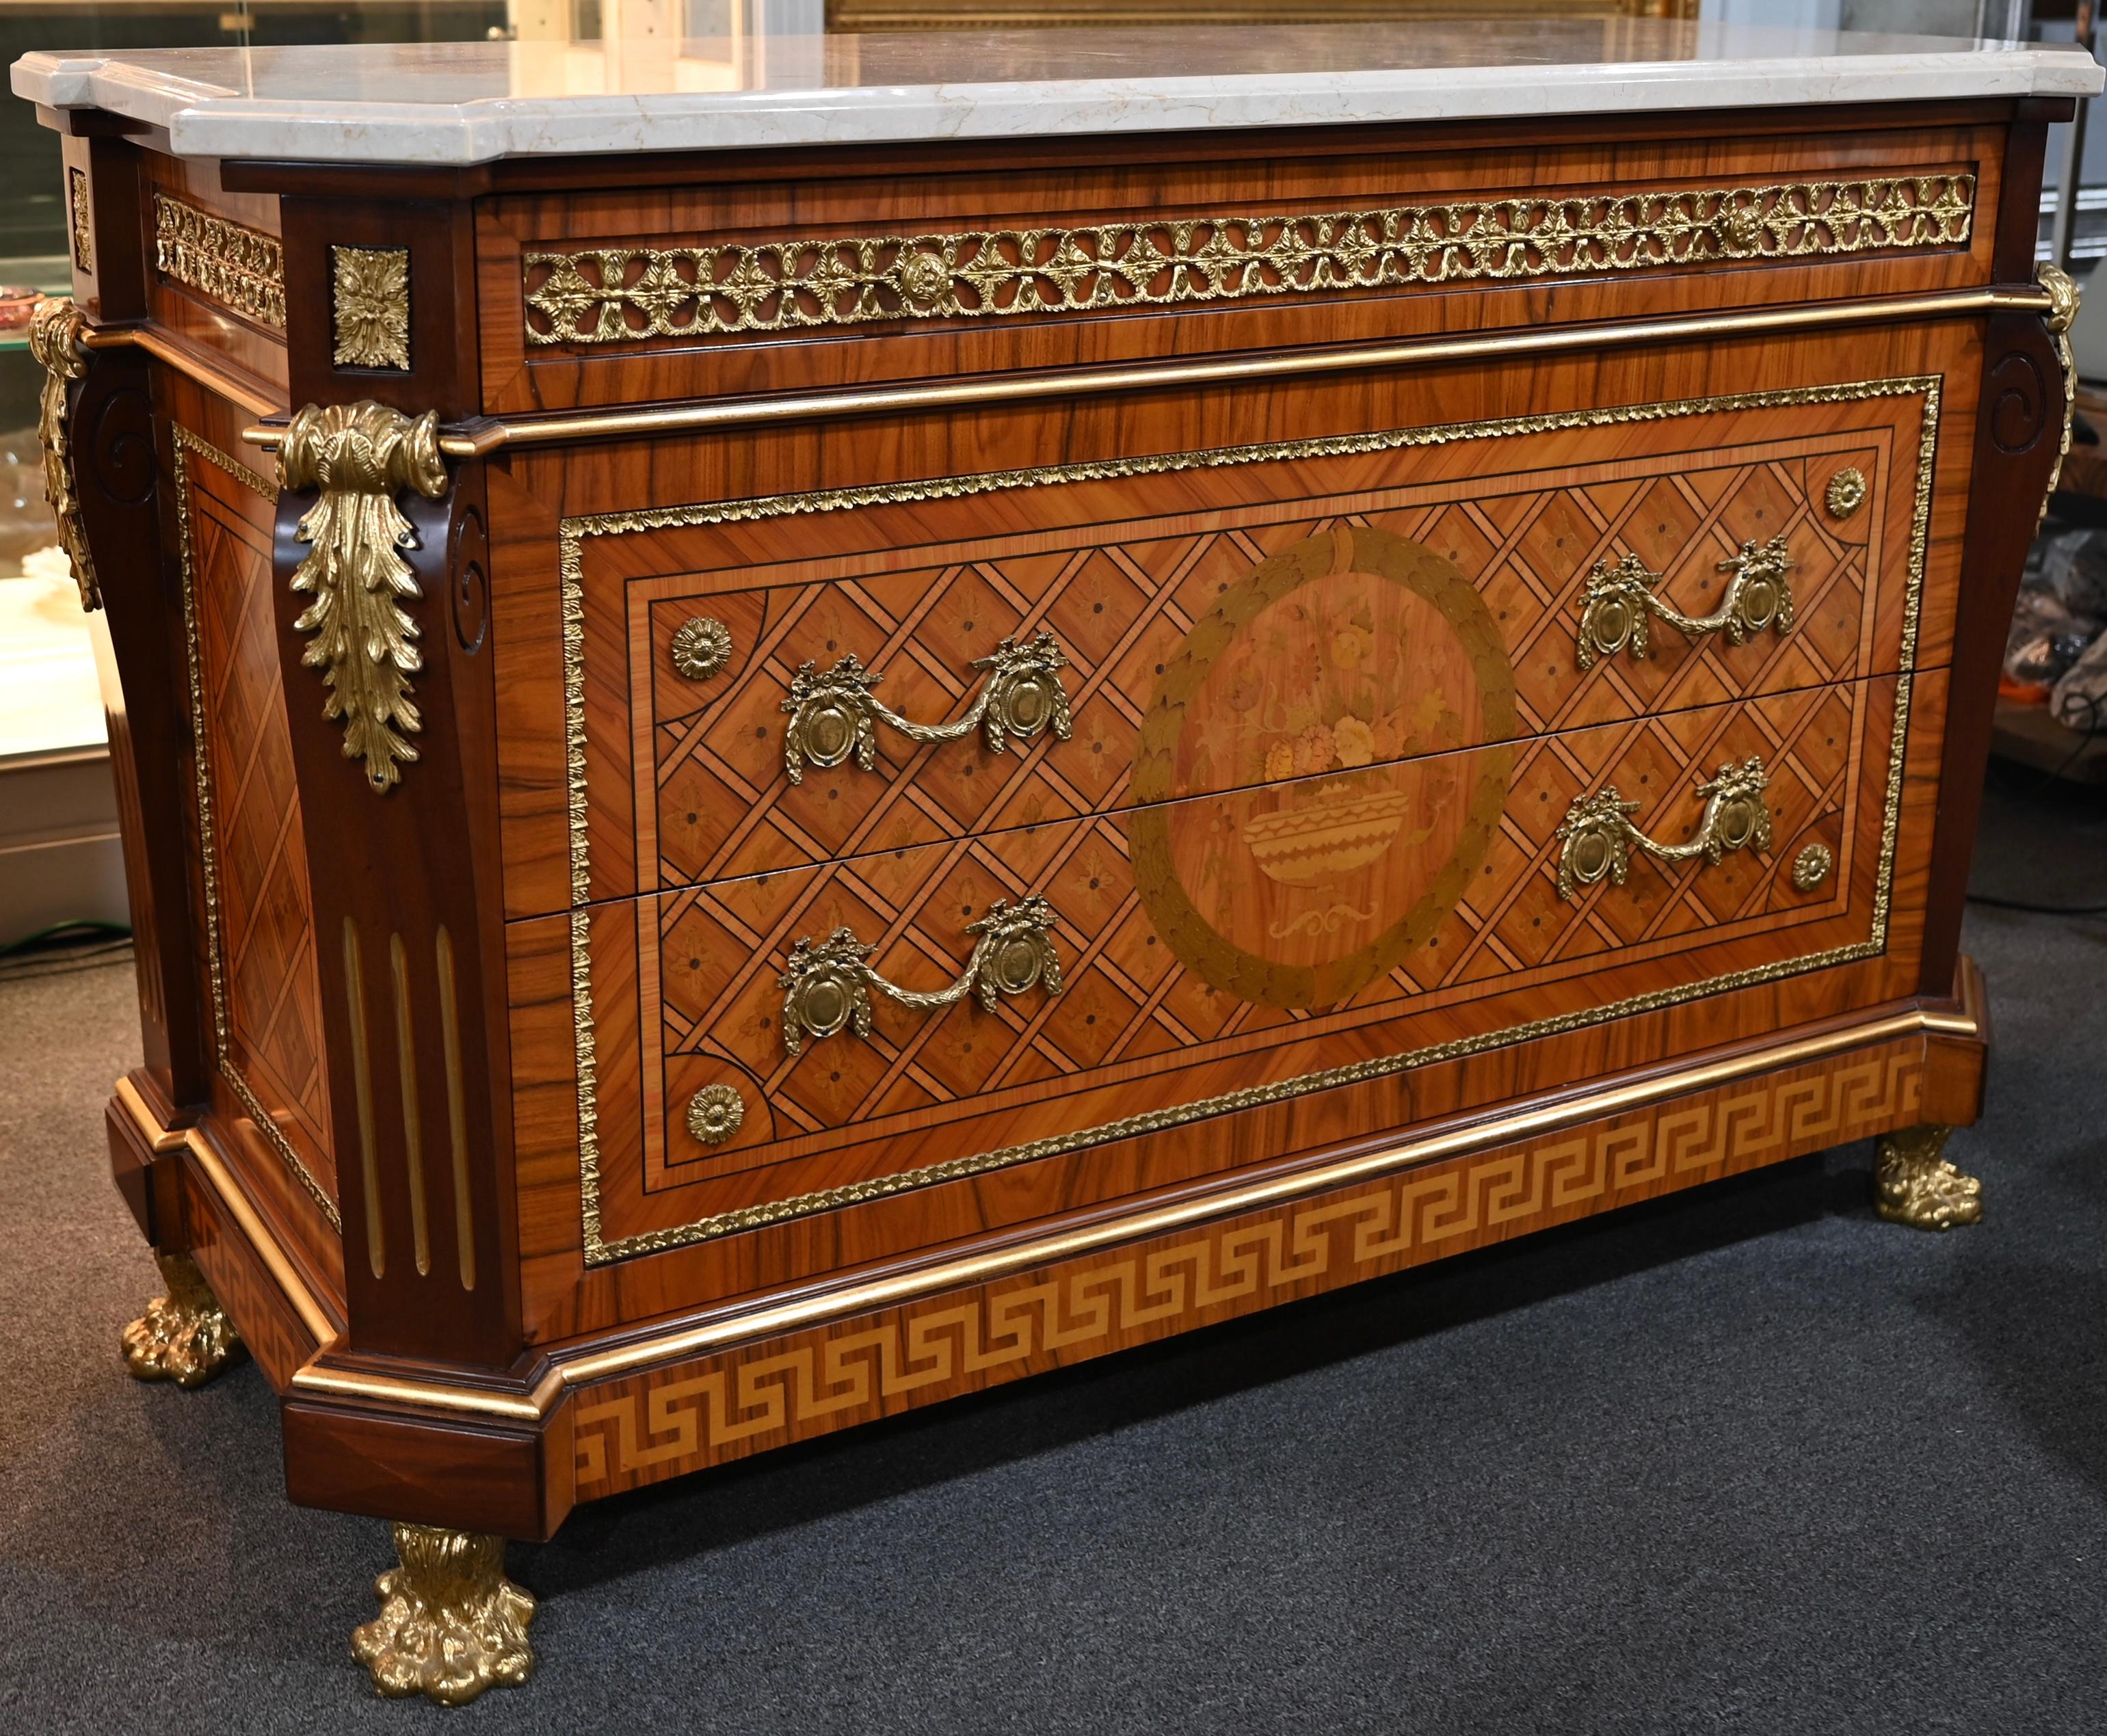 A very fine quality Louis XVI Style ormolu-mounted commode or chest of drawers with an Italian white marble top that is truly breathtaking! Intricate inlaid marquetry design throughout, the front and sides of the piece as well. Remarkable attention